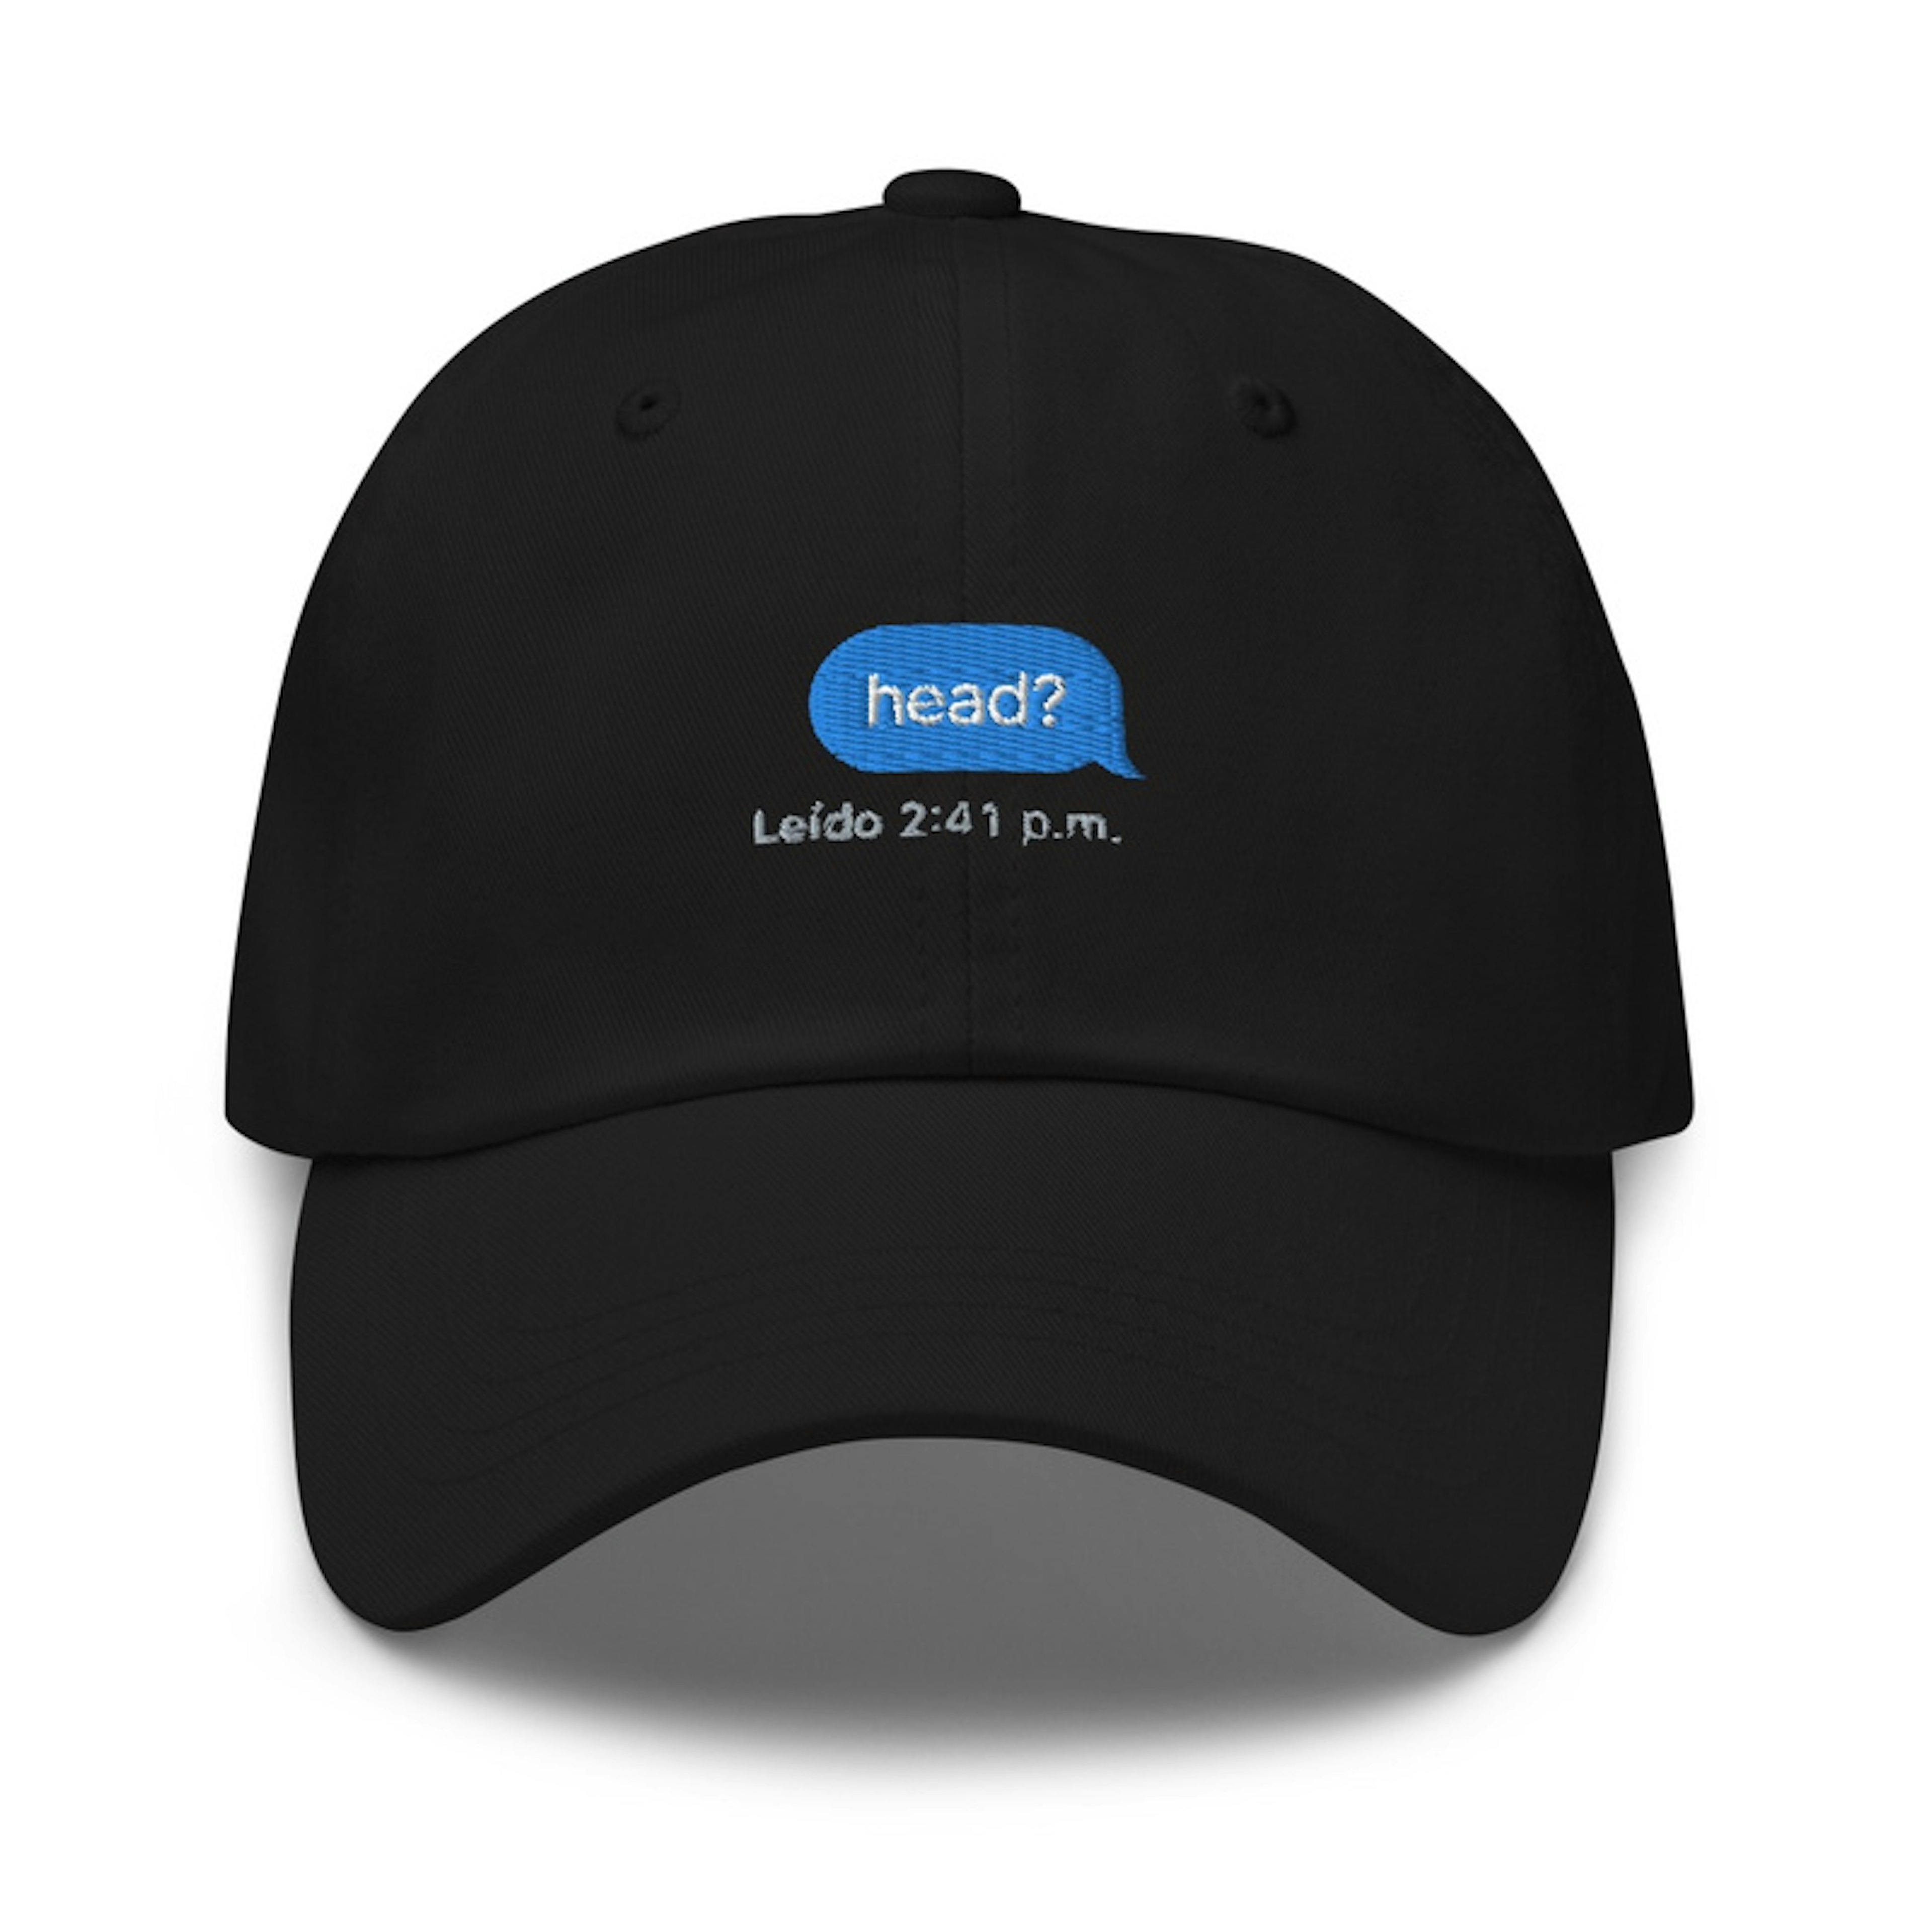 DAD HAT - “head?” EMBROIDERED (Spanish)